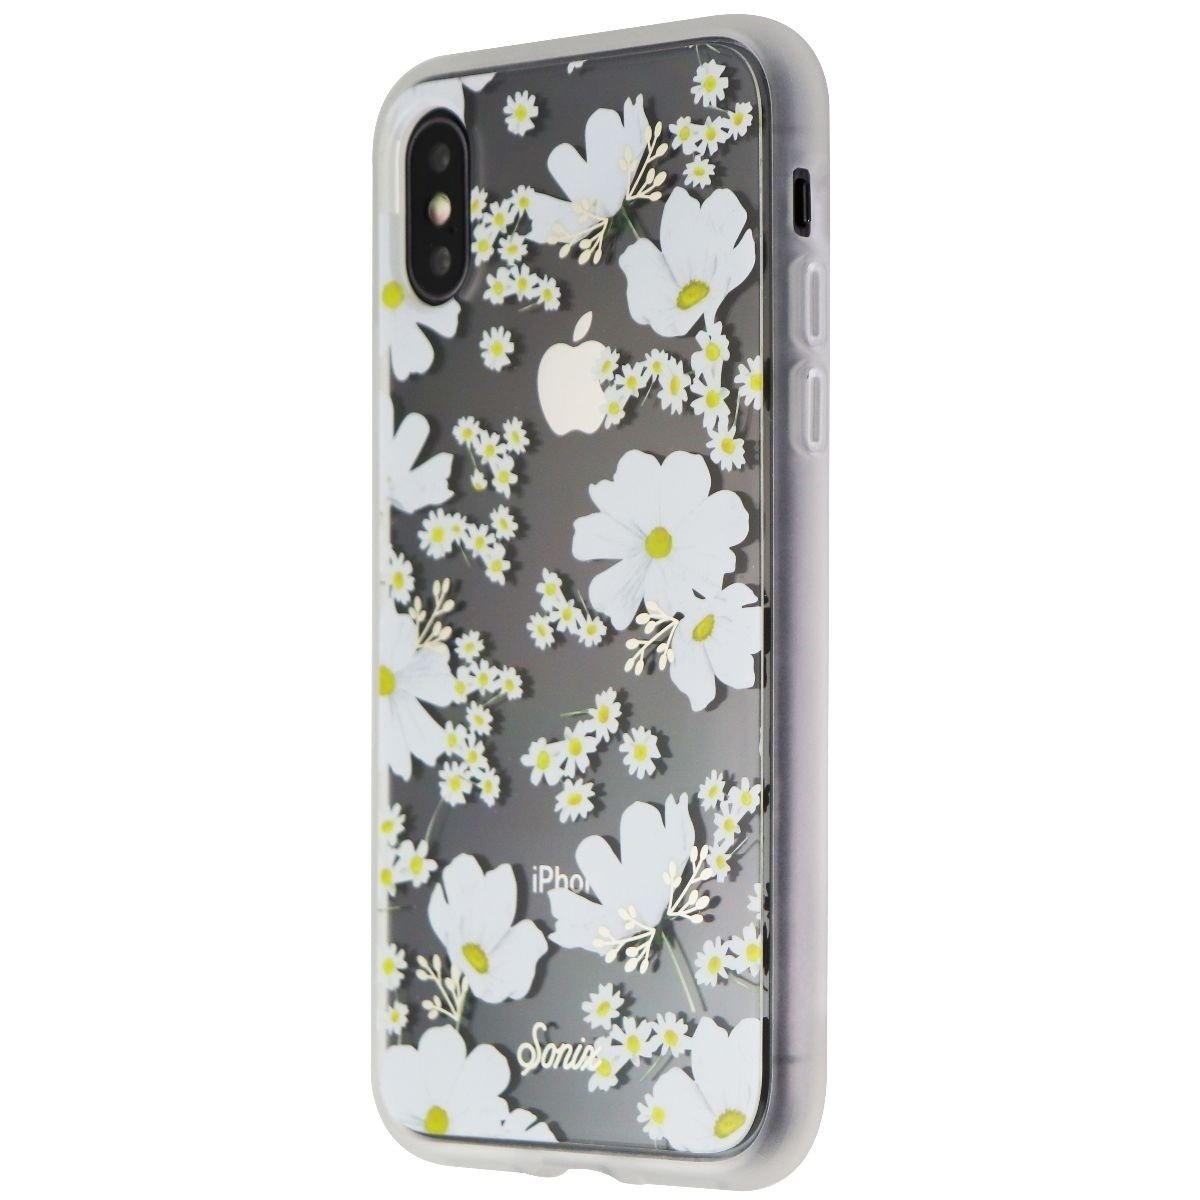 Sonix Clear Coat Series Case For Apple IPhone Xs / IPhone X - Ditsy Daisy/Clear